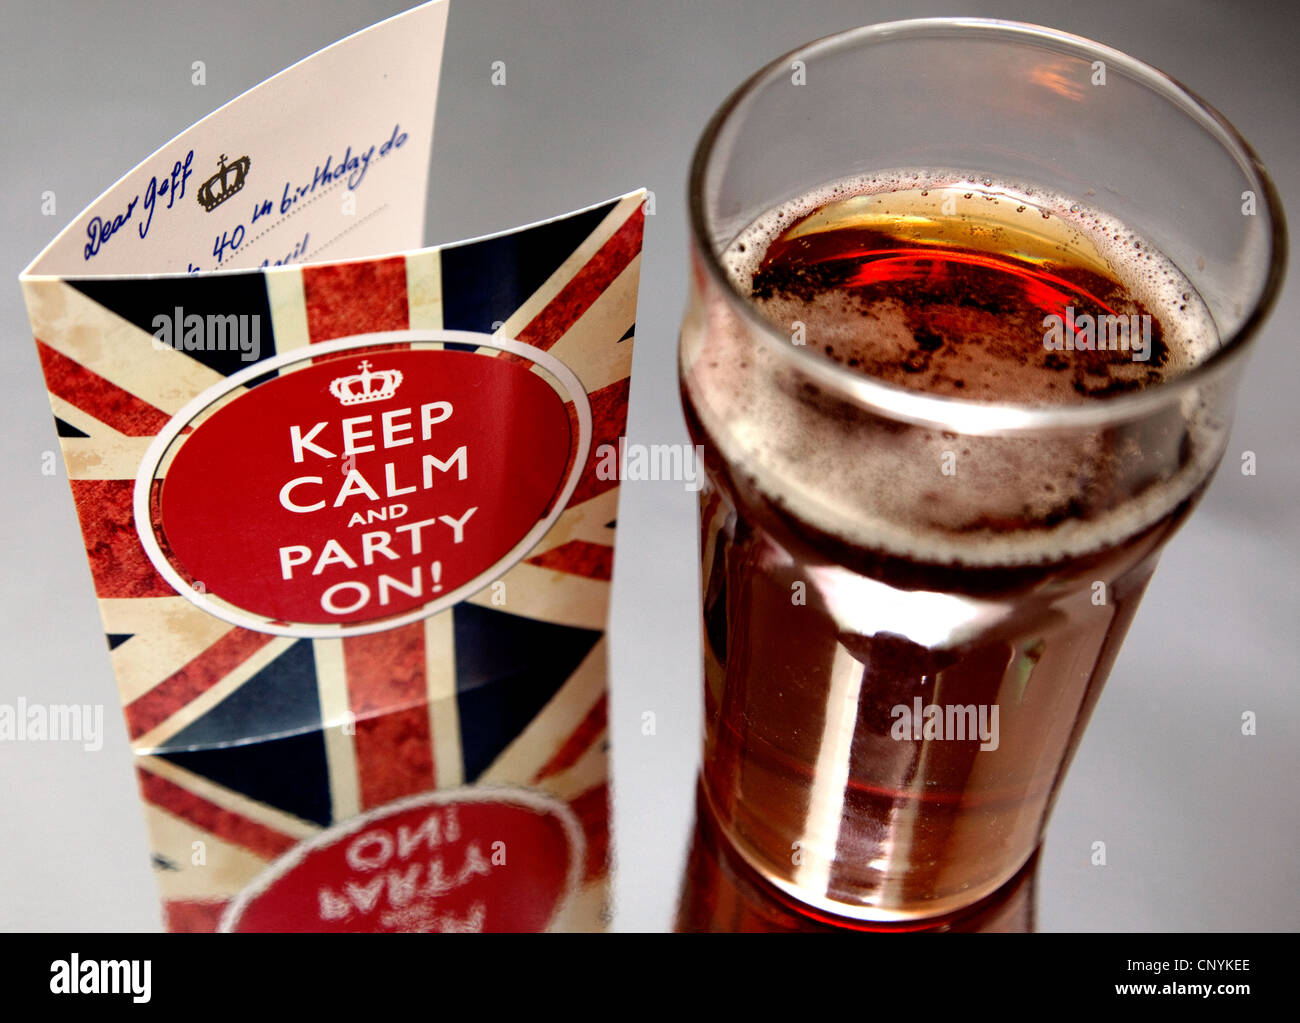 Keep Calm and Party On invitation card, London Stock Photo